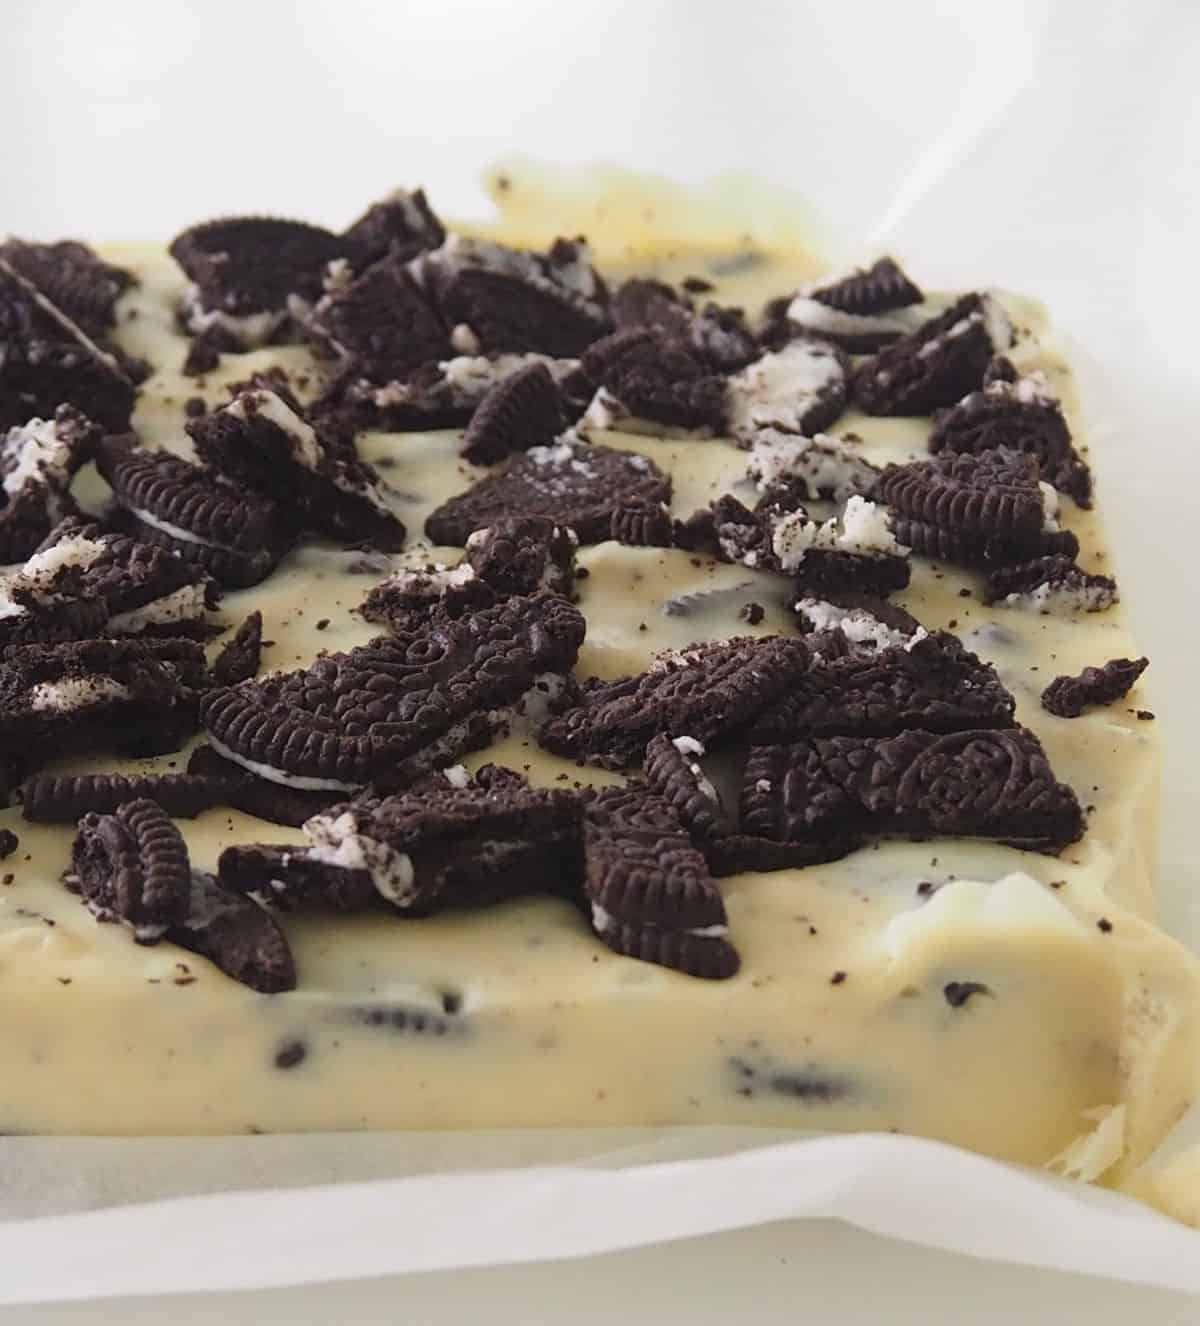 Uncut slab of White chocolate and Oreo fudge sitting on a piece of baking paper.